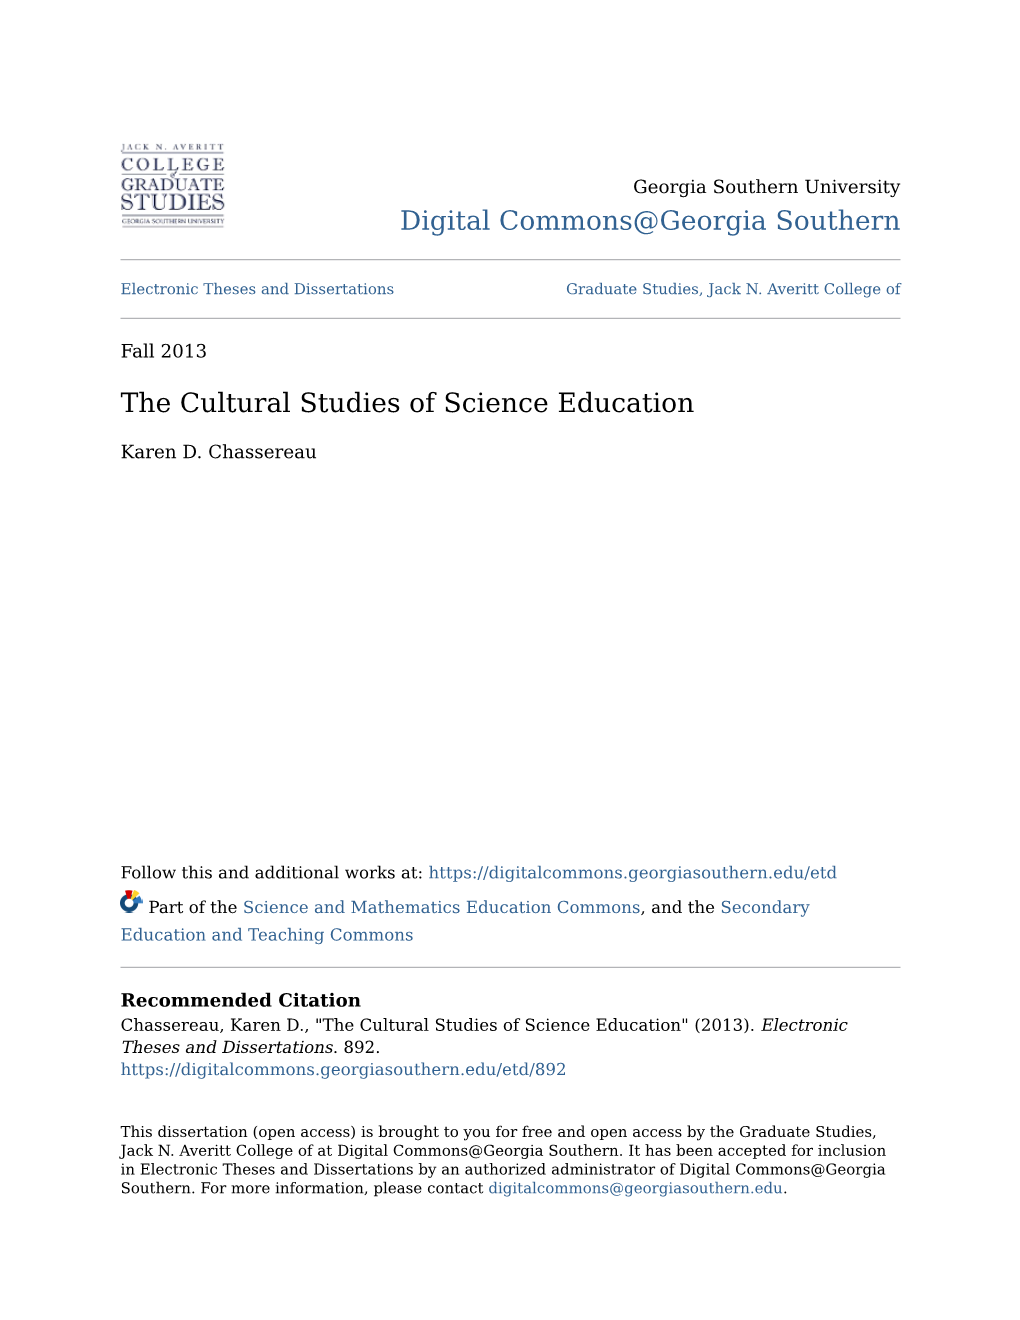 The Cultural Studies of Science Education